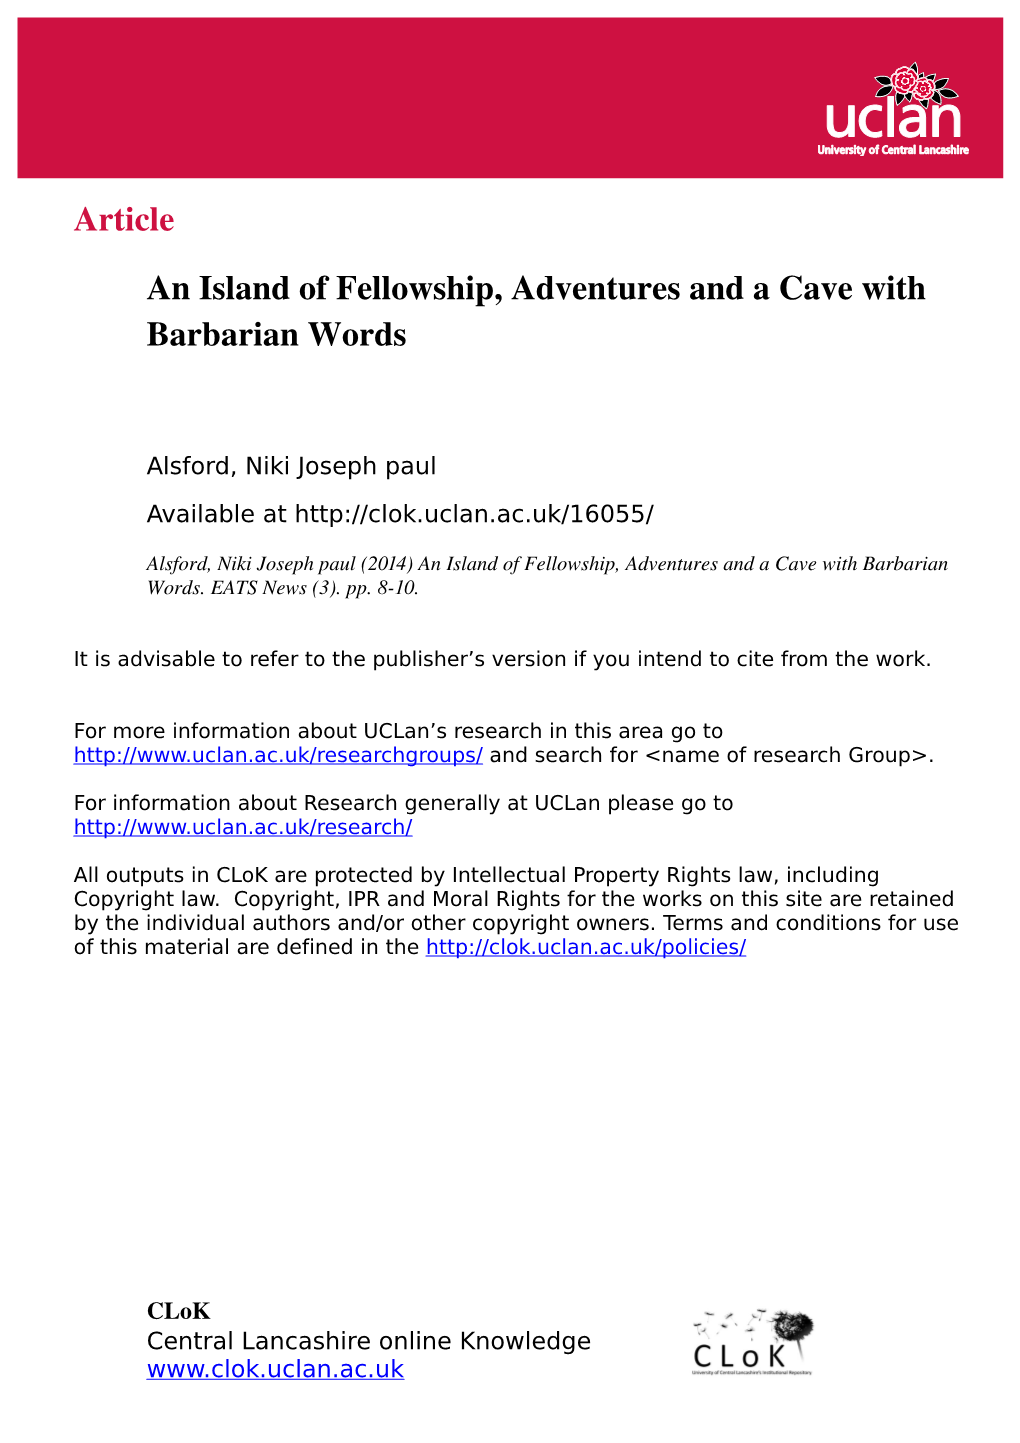 Article an Island of Fellowship, Adventures and a Cave With